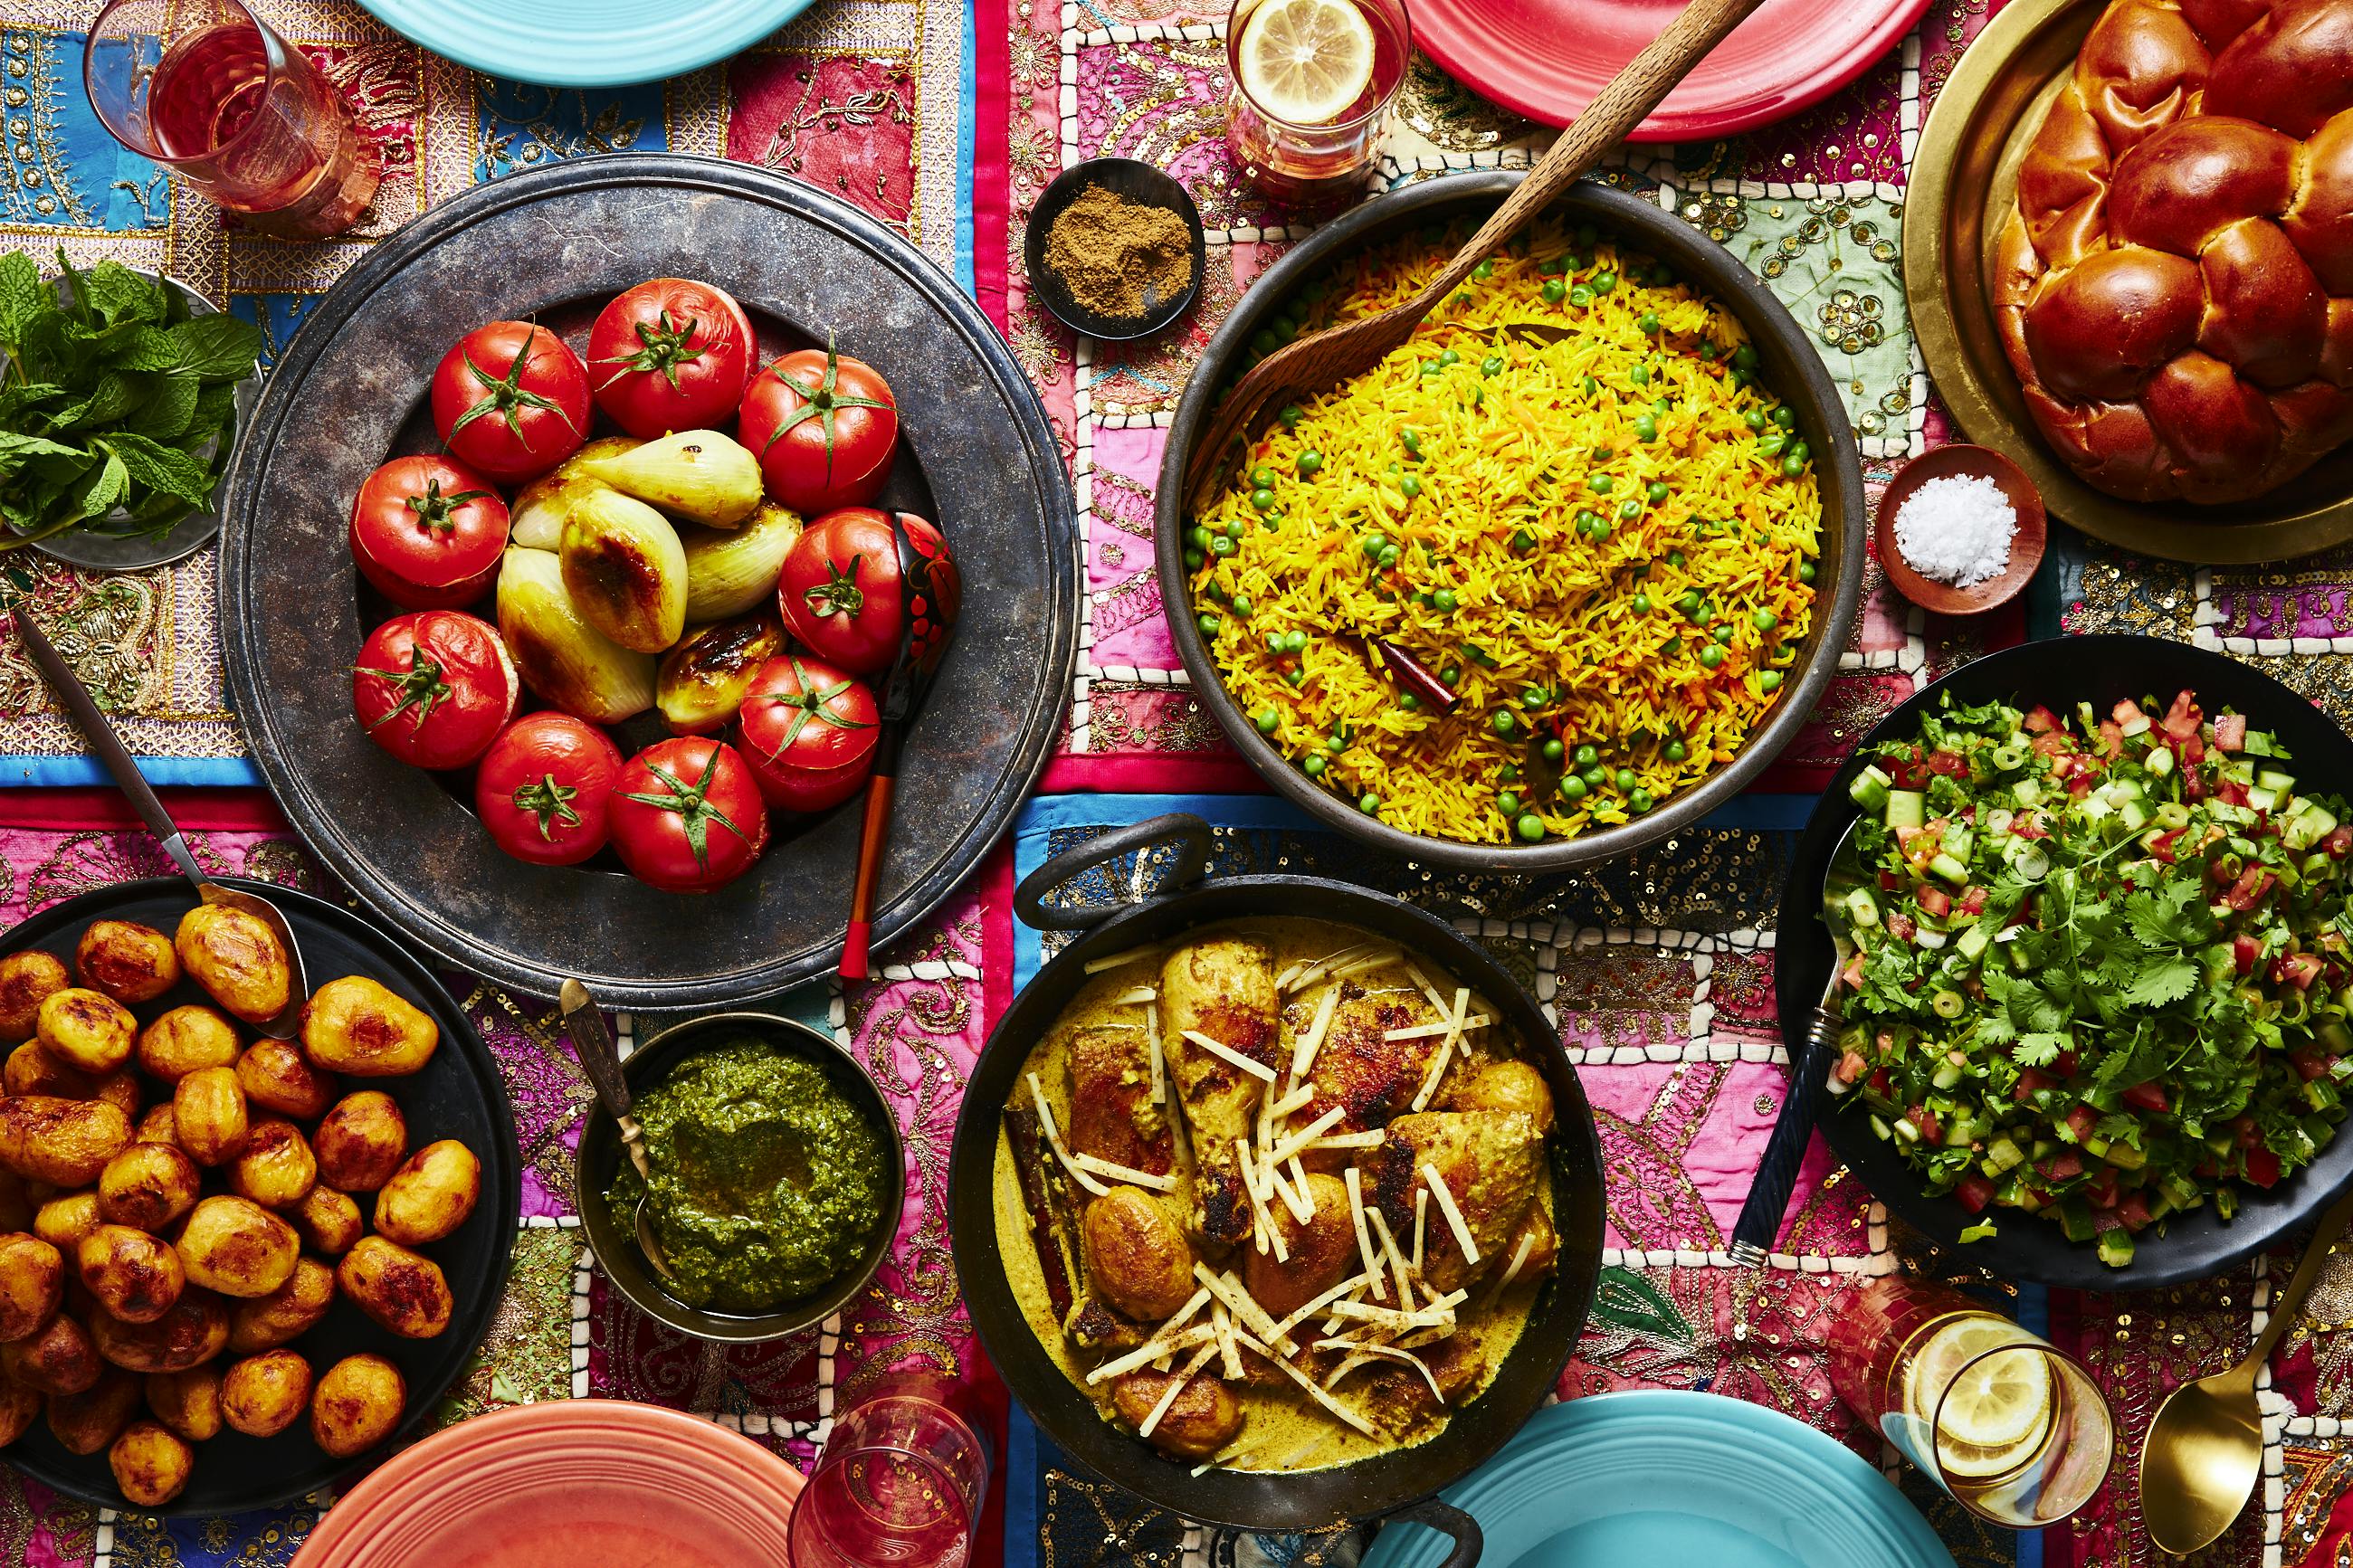 Vibrant shabbat table with spread of Indian-Baghdadi Jewish dishes.